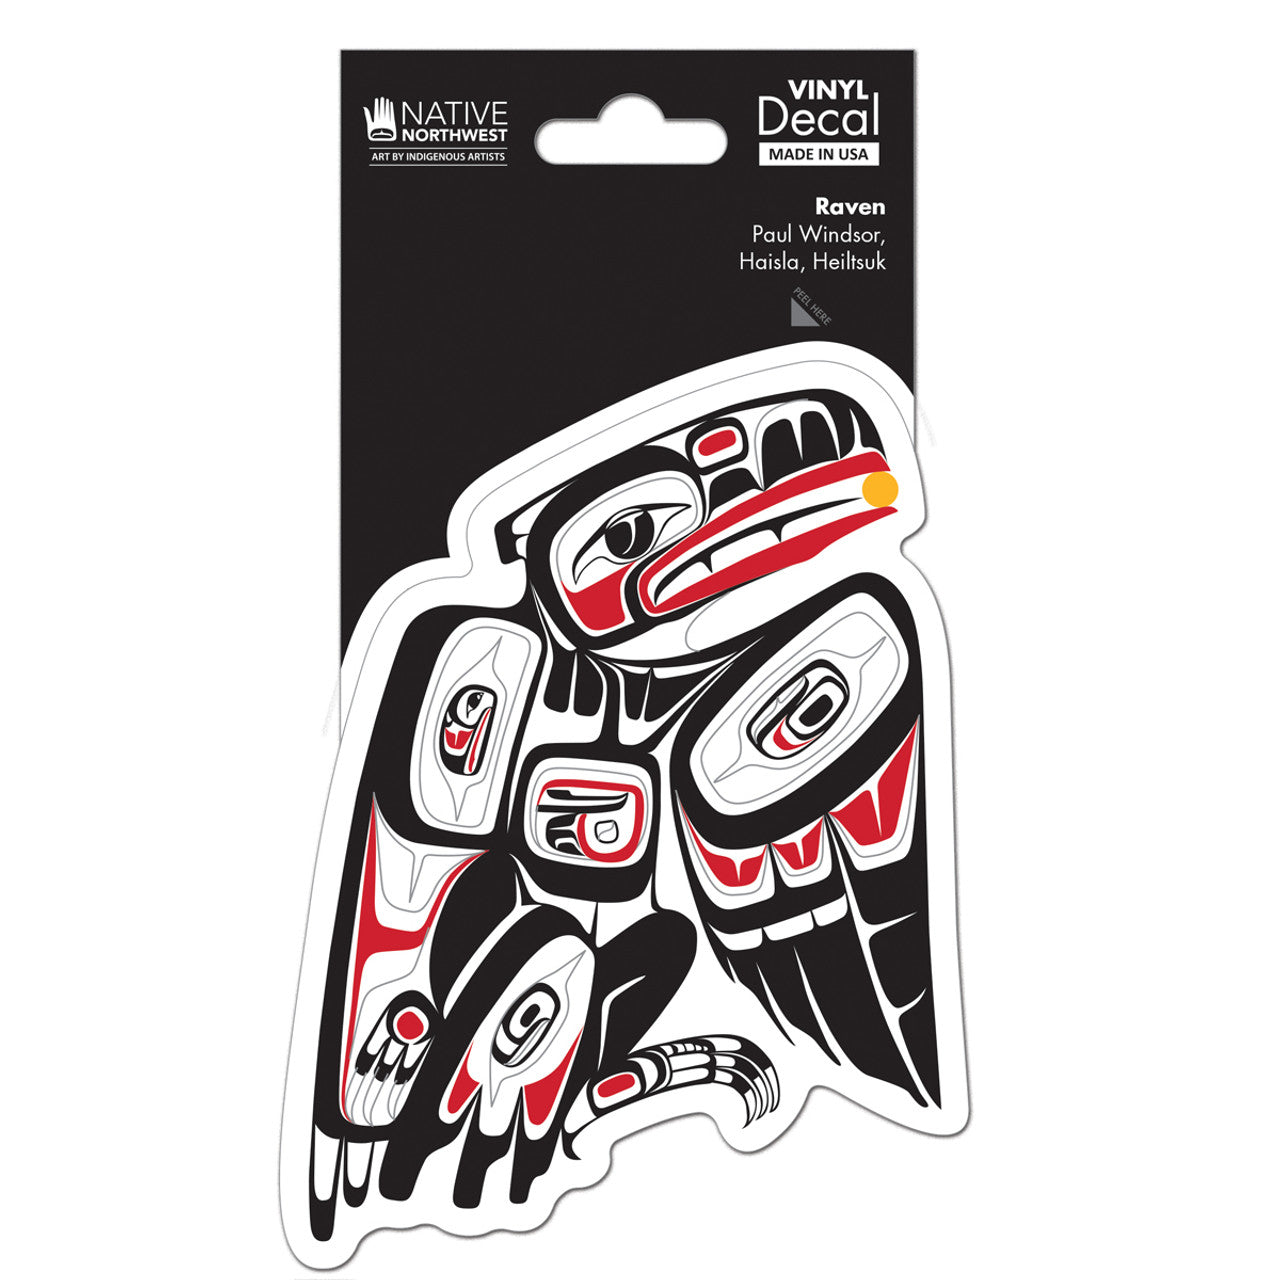 DECALS - Paul Windsor Raven - D242 - House of Himwitsa Native Art Gallery and Gifts